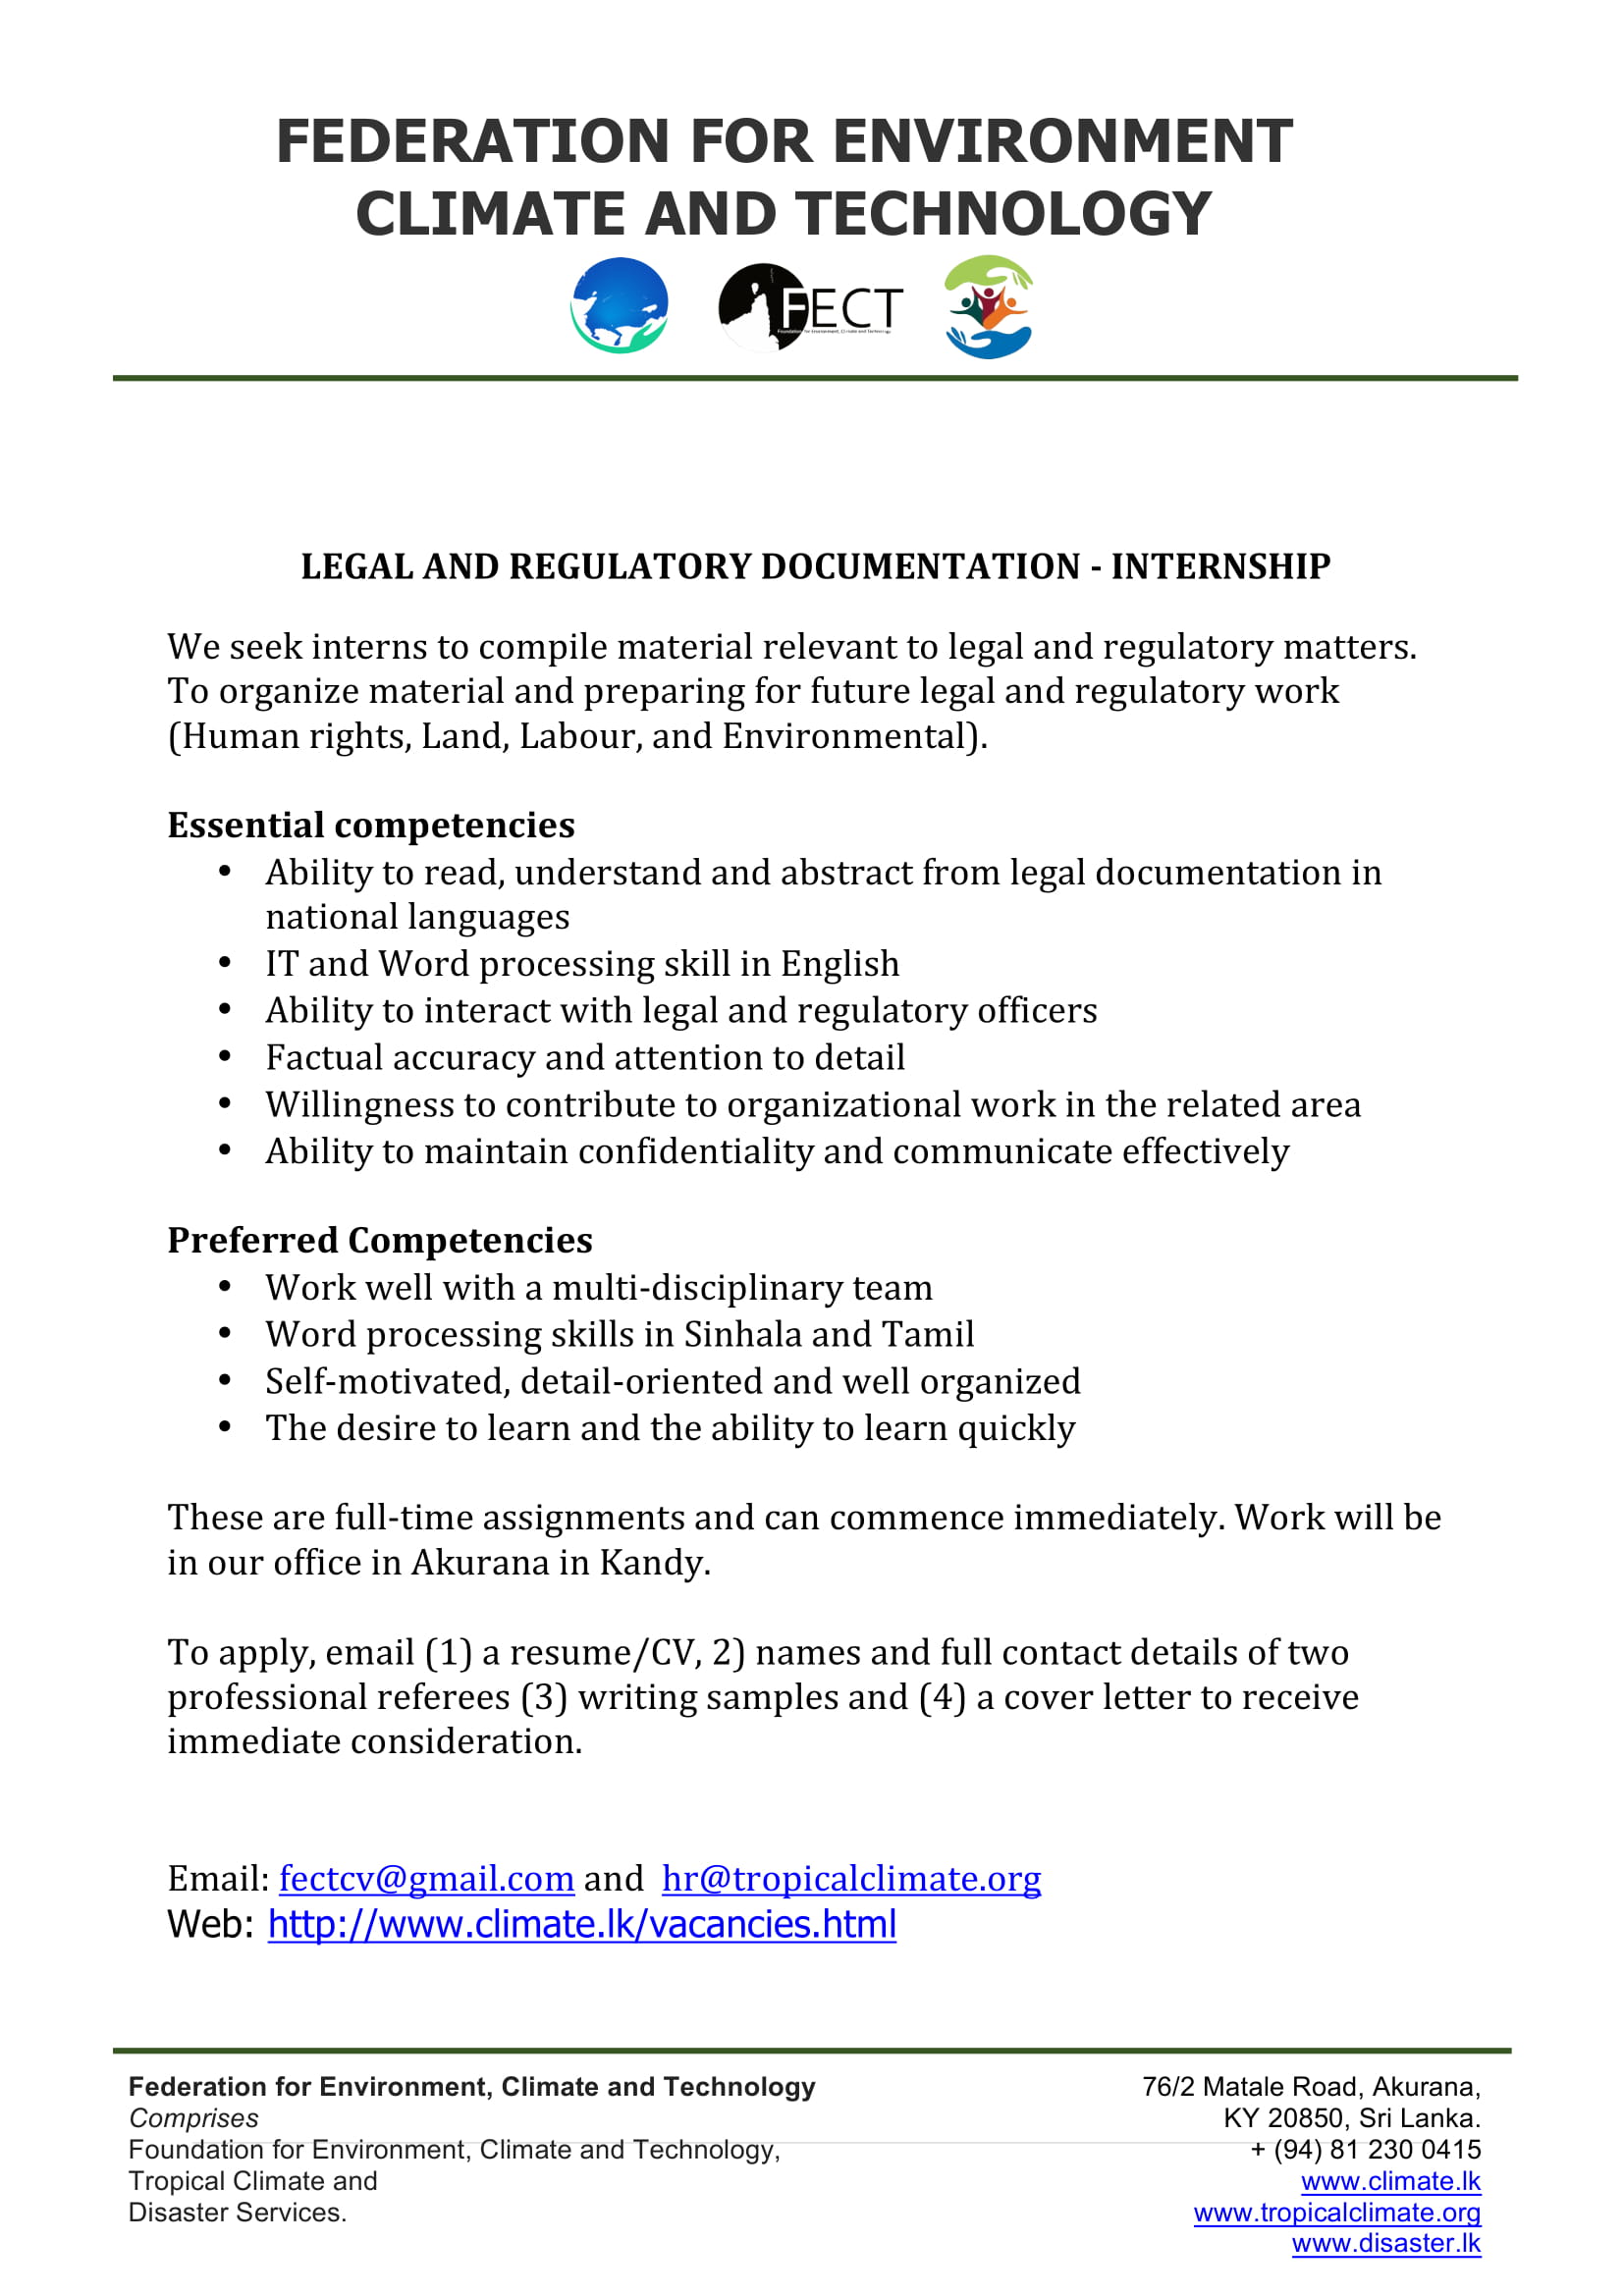  Vacancies are open for LEGAL AND REGULATORY DOCUMENTATION ASSISTANT